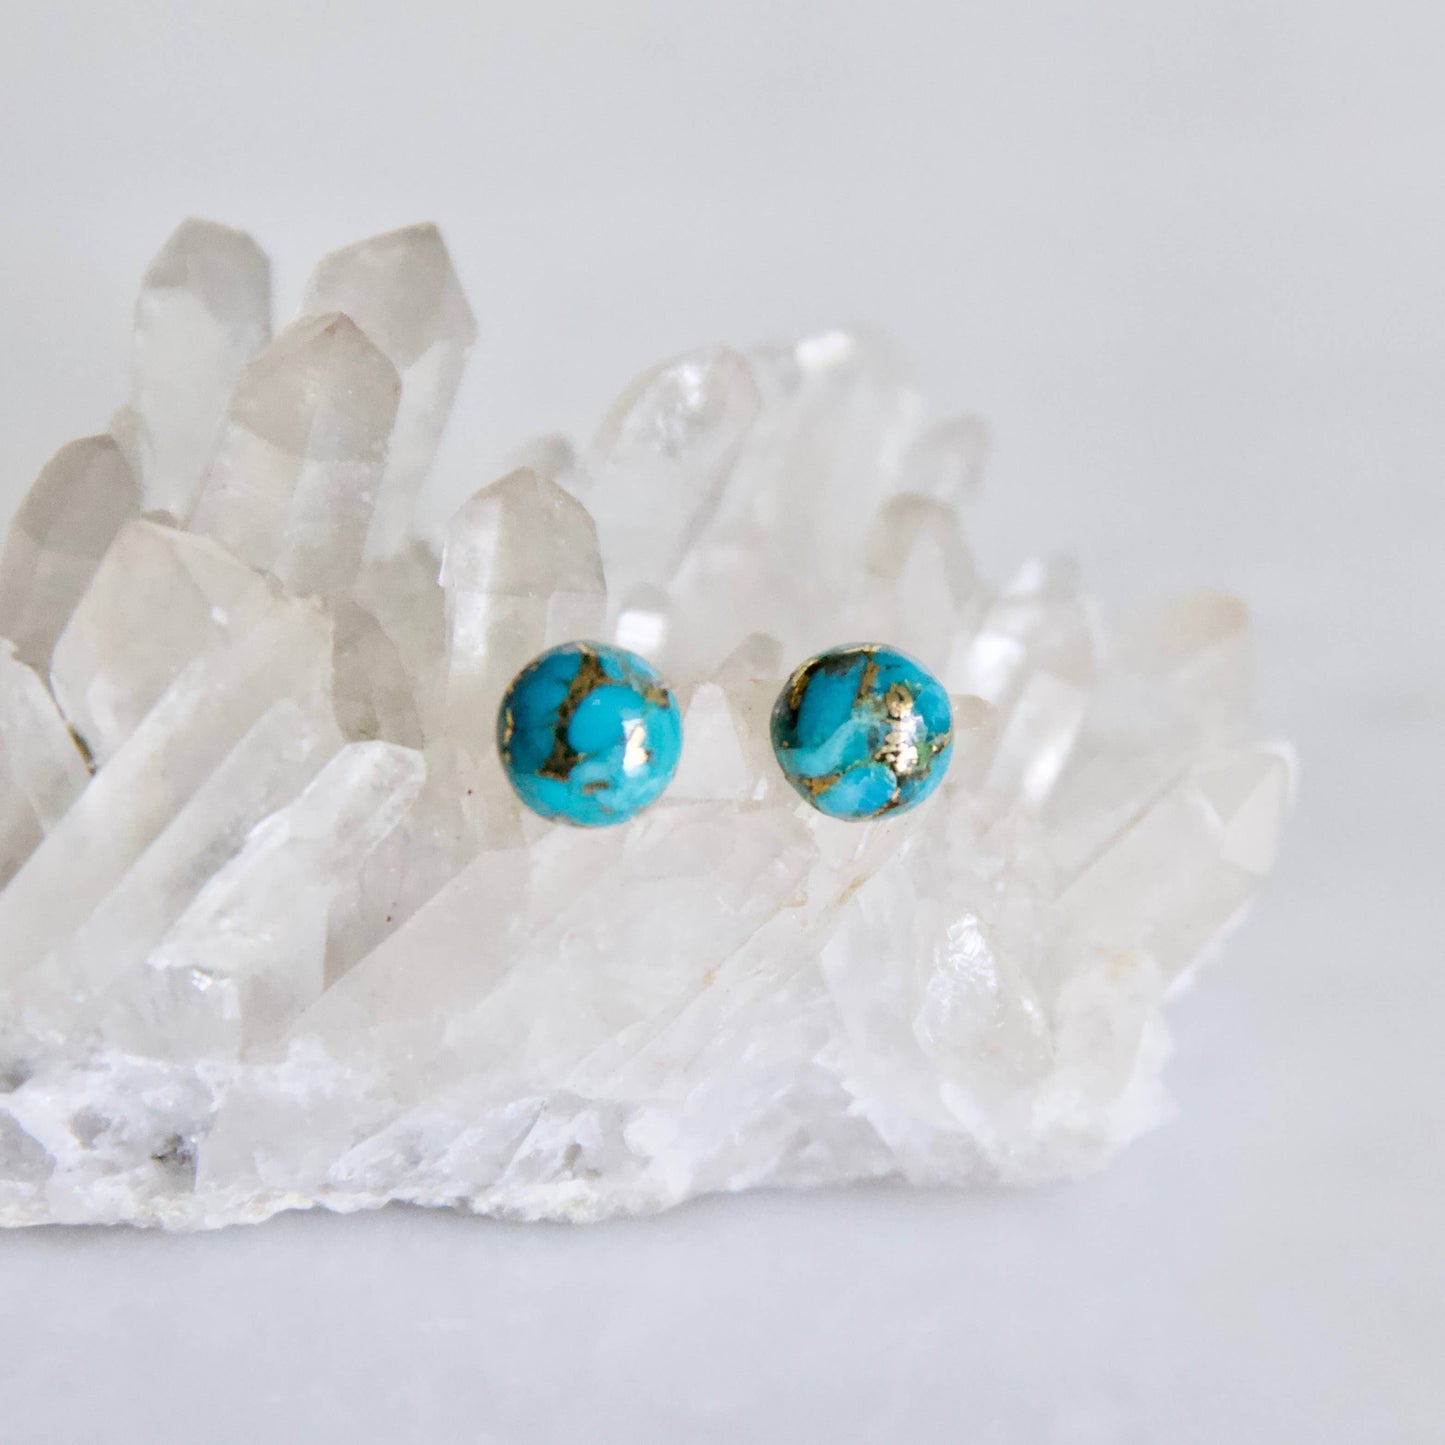 Copper Turquoise Stud Earrings - Round - Storm and Sky Shoppe